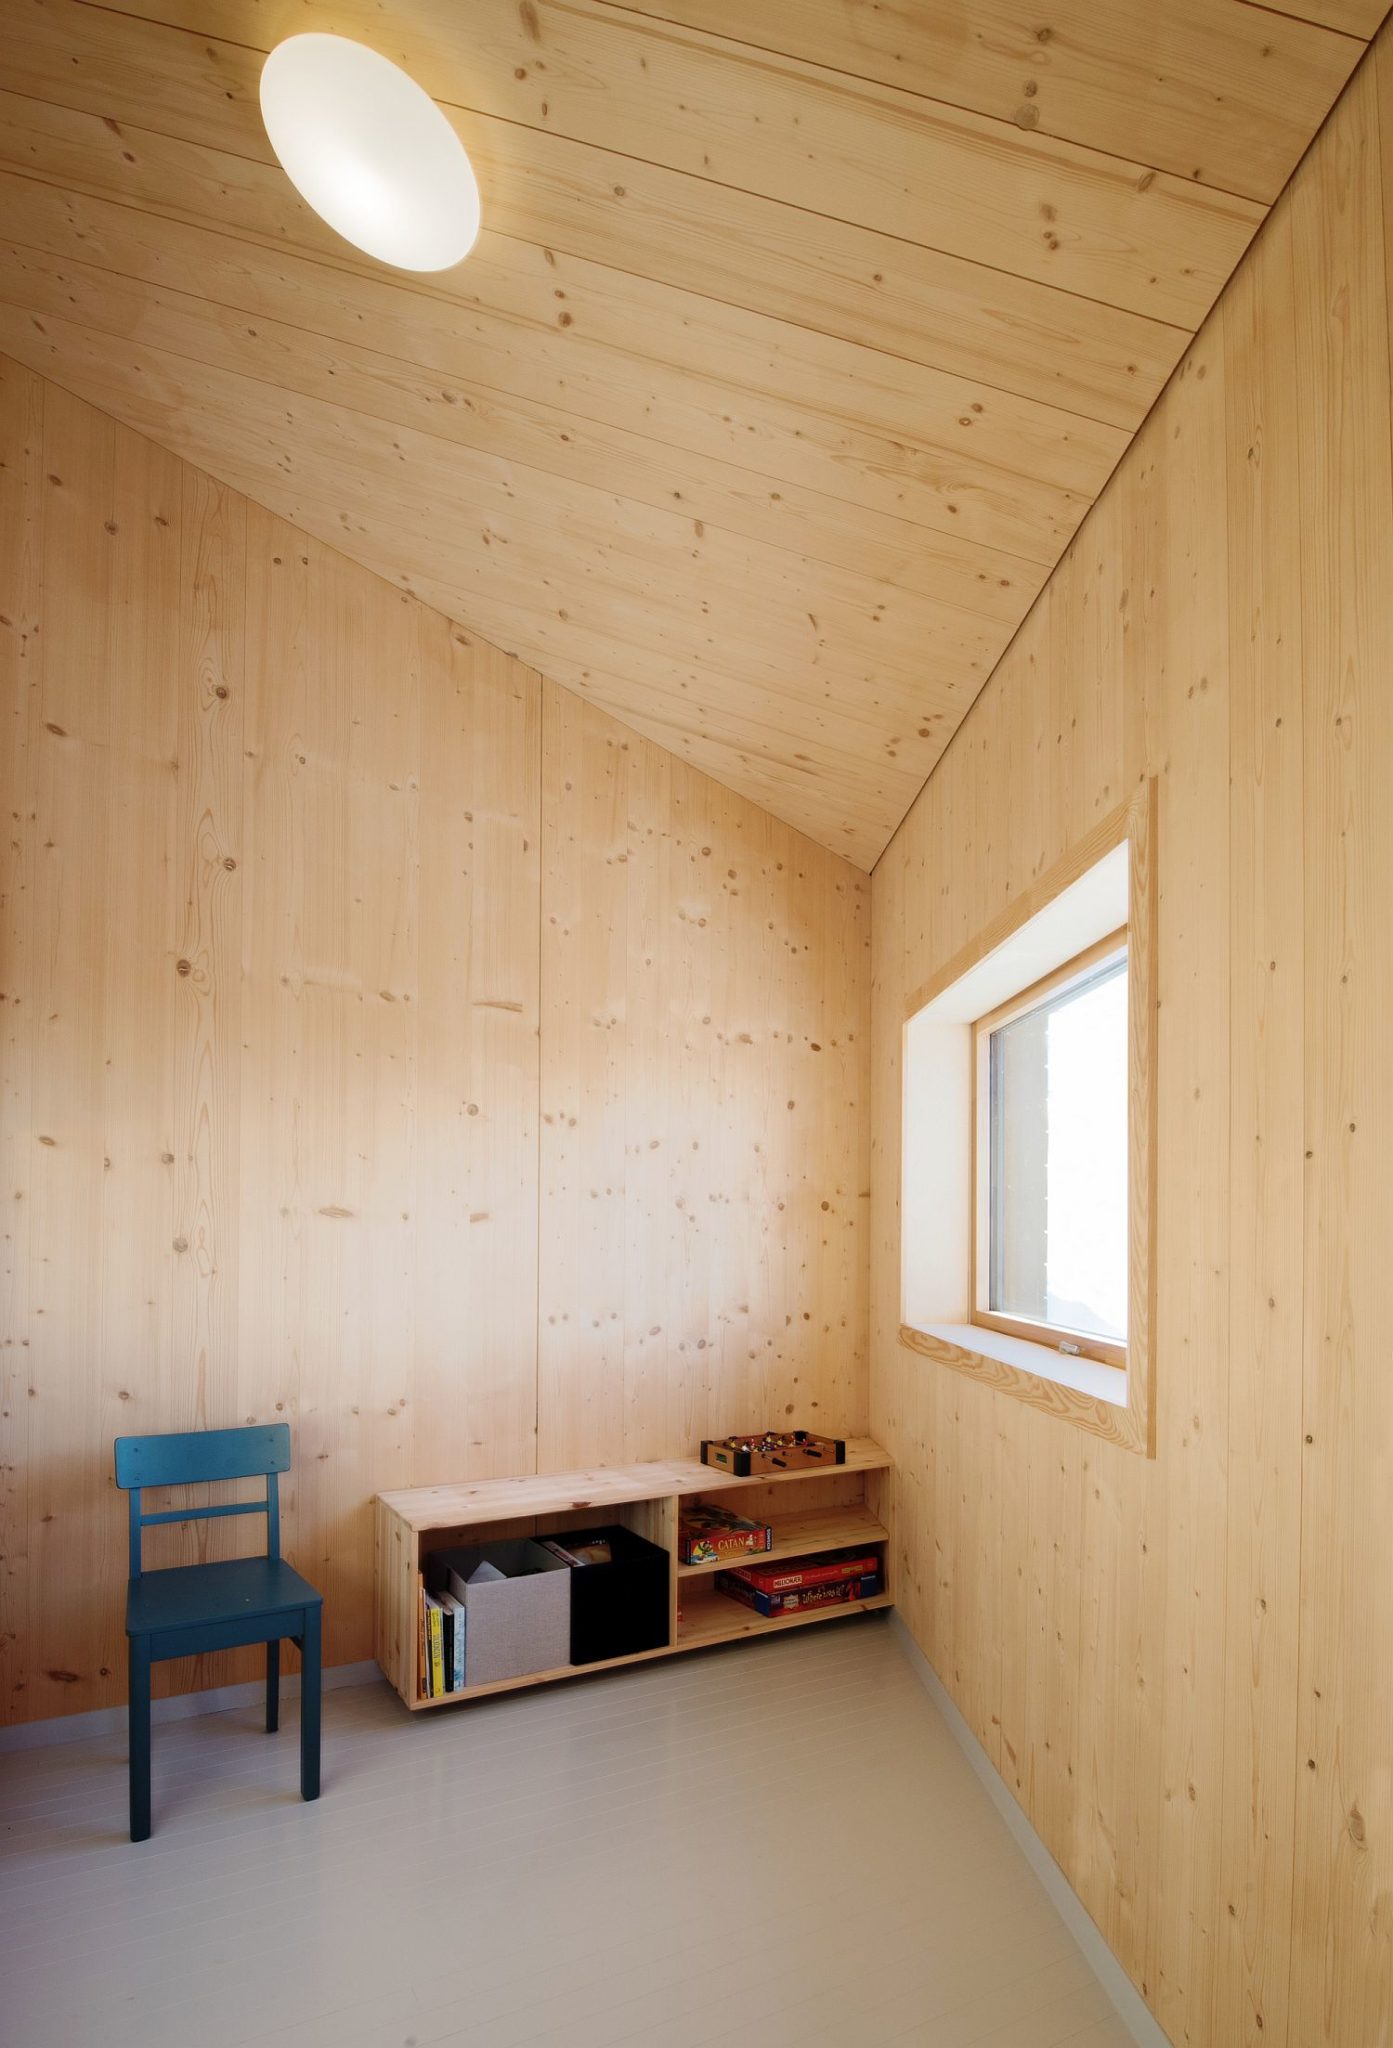 Simplicity-and-minimalism-make-a-statement-inside-the-cabin